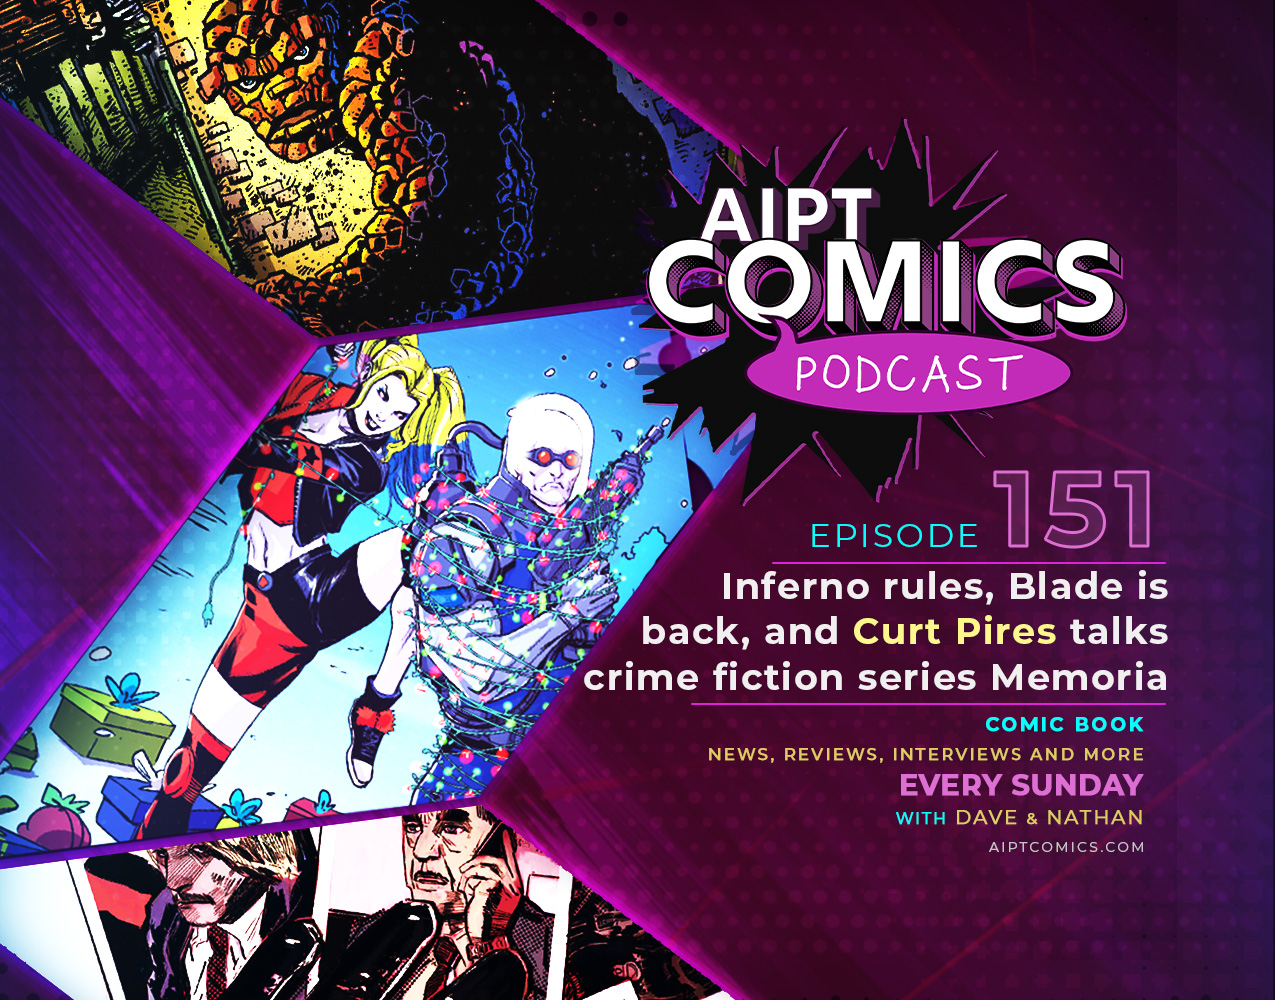 AIPT Comics podcast episode 151: Inferno rules, Blade is back, and Curt Pires talks crime fiction series 'Memoria'